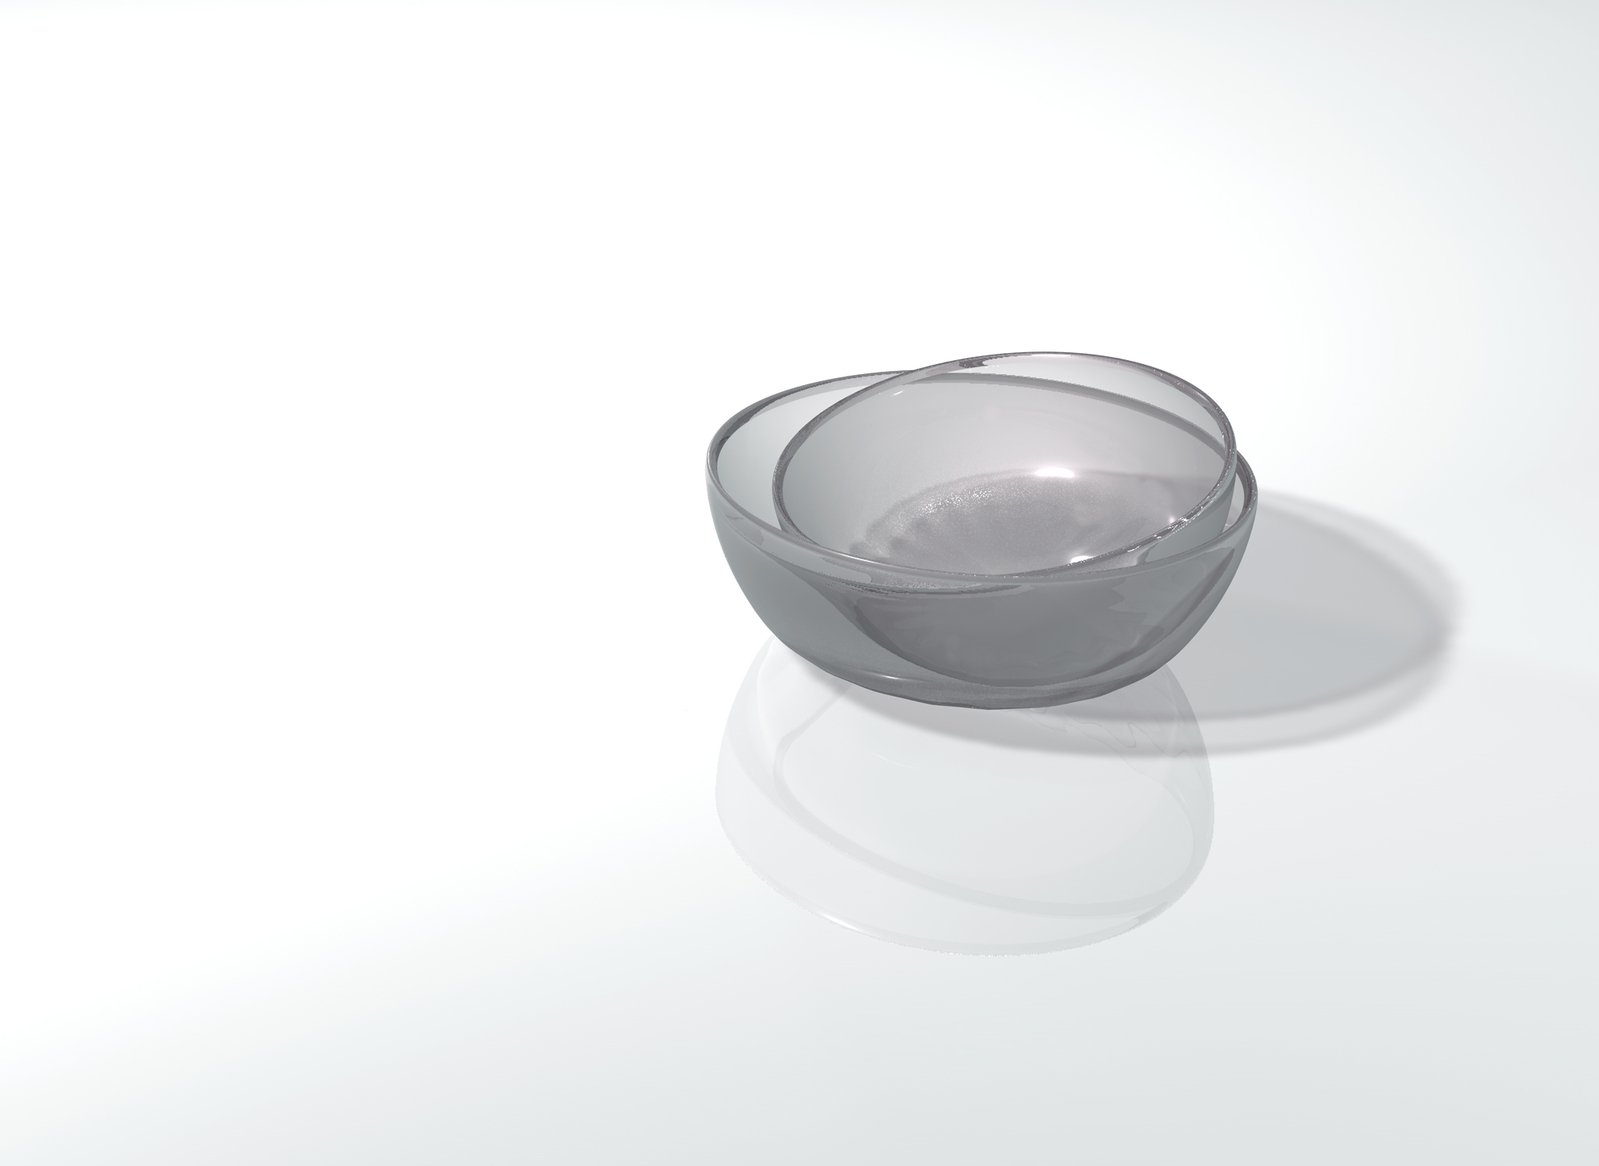 a clear bowl sits on top of a reflective surface